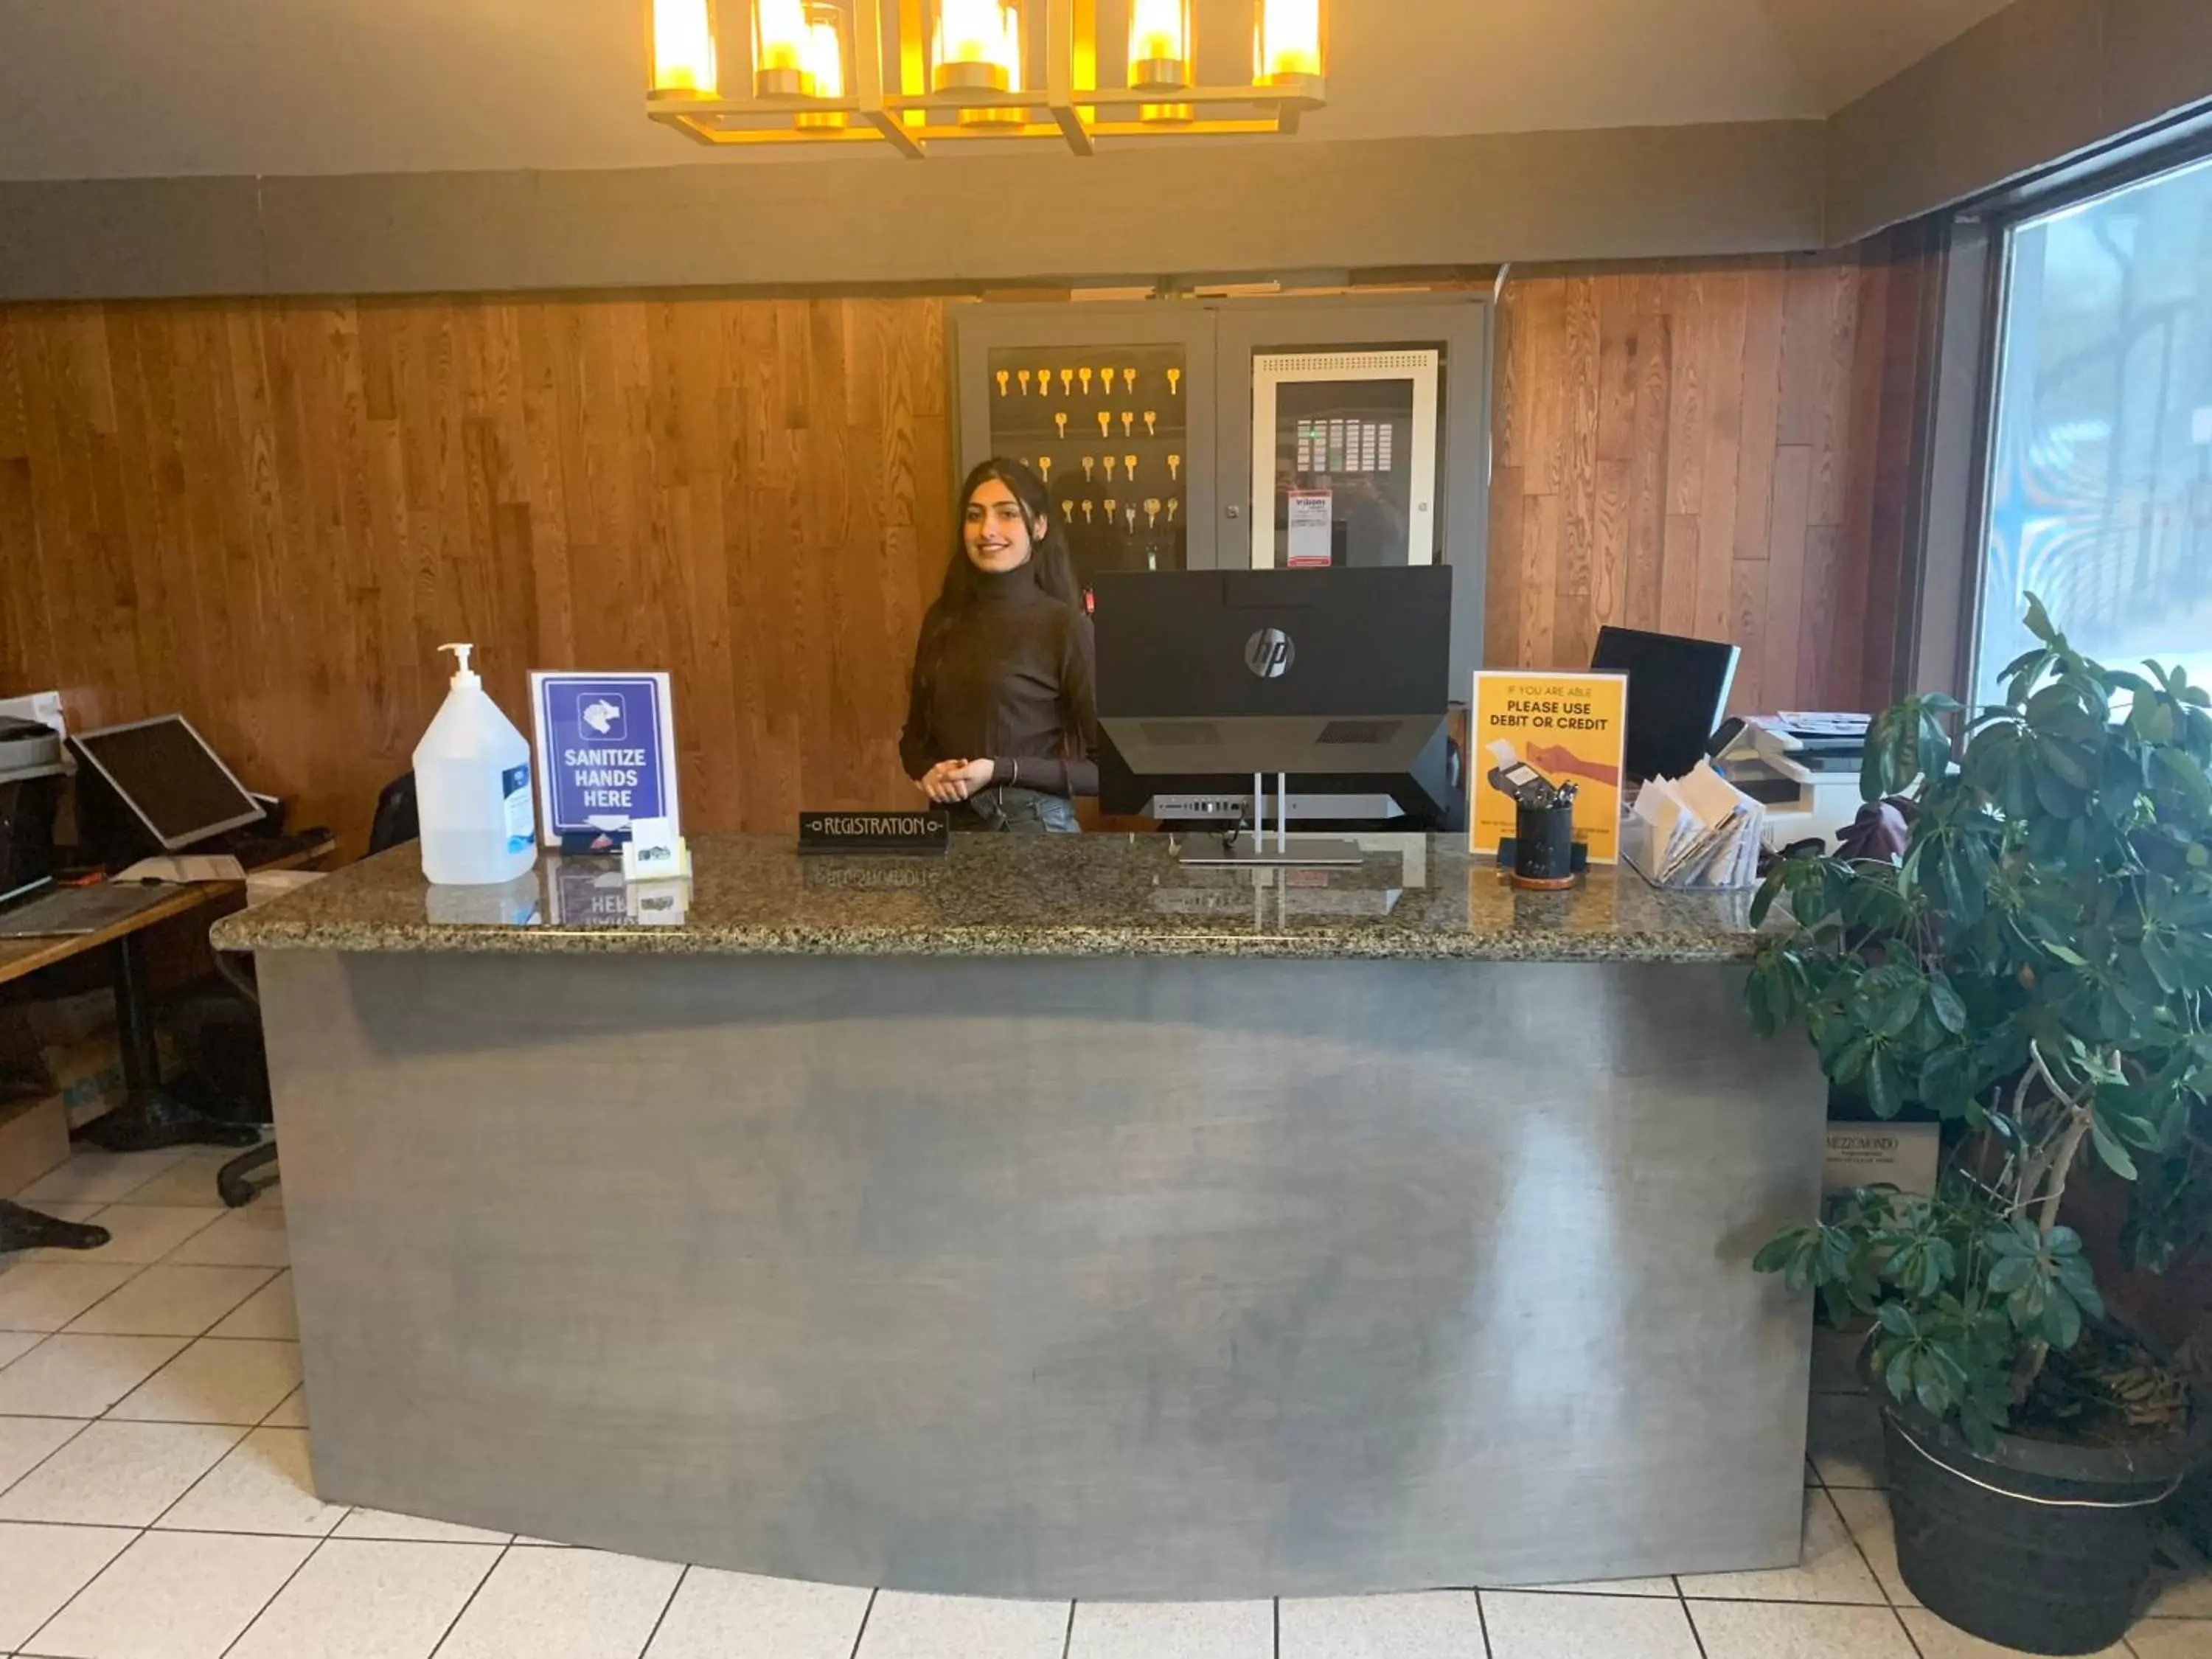 Lobby/Reception in Stonehouse Motel and Restaurant